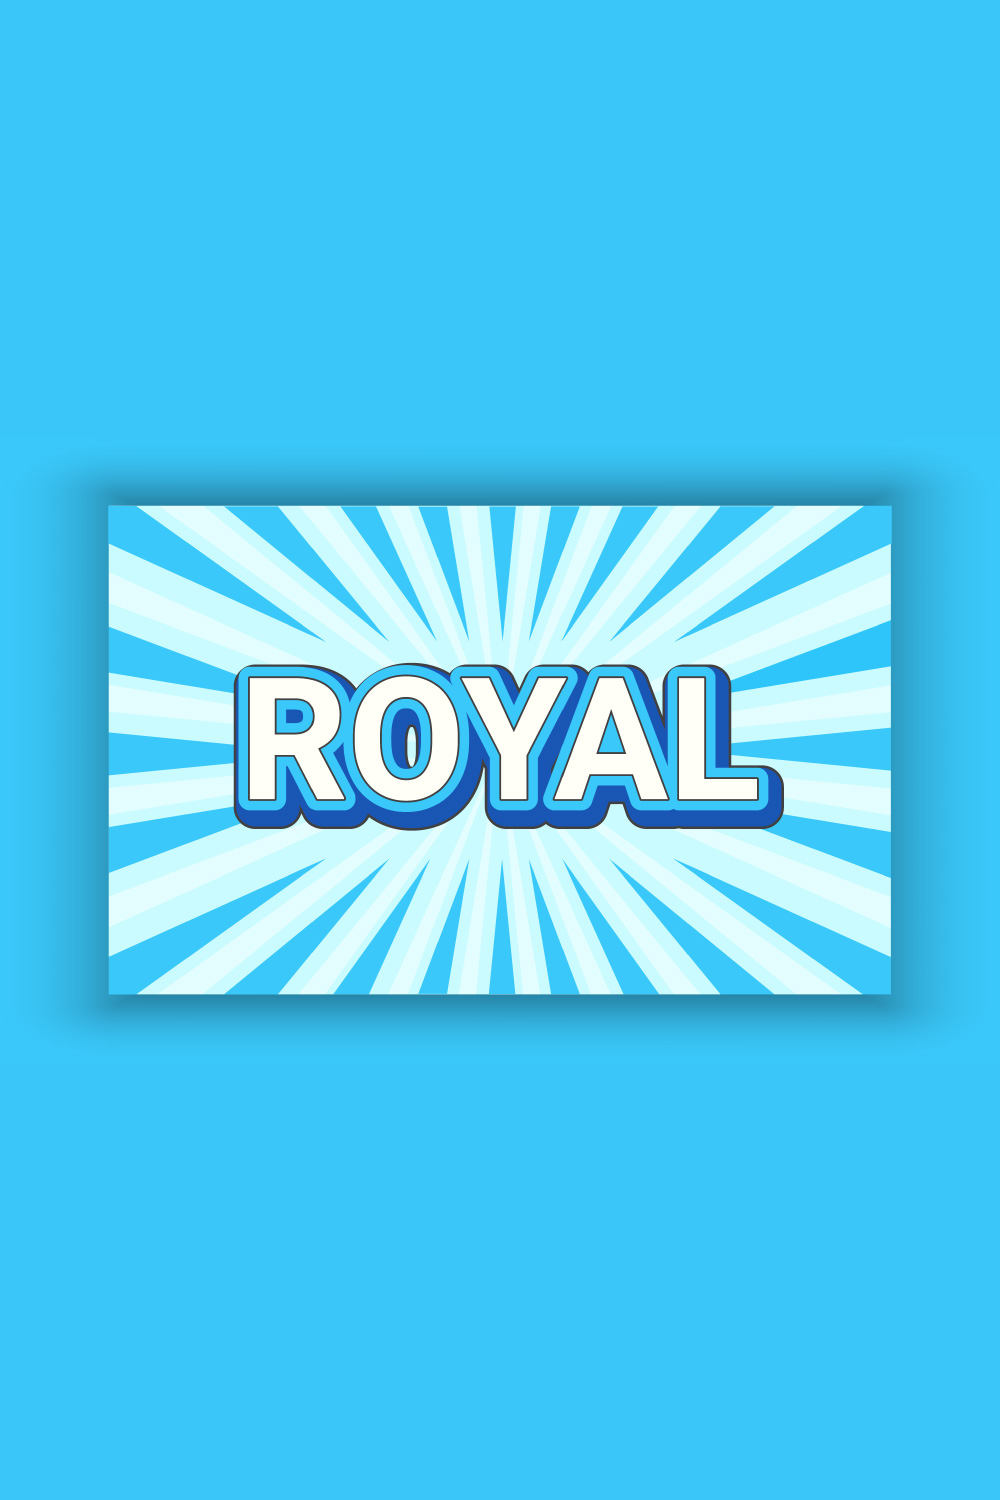 Royal Effect Template With 3D Bold Style - Pinterest.